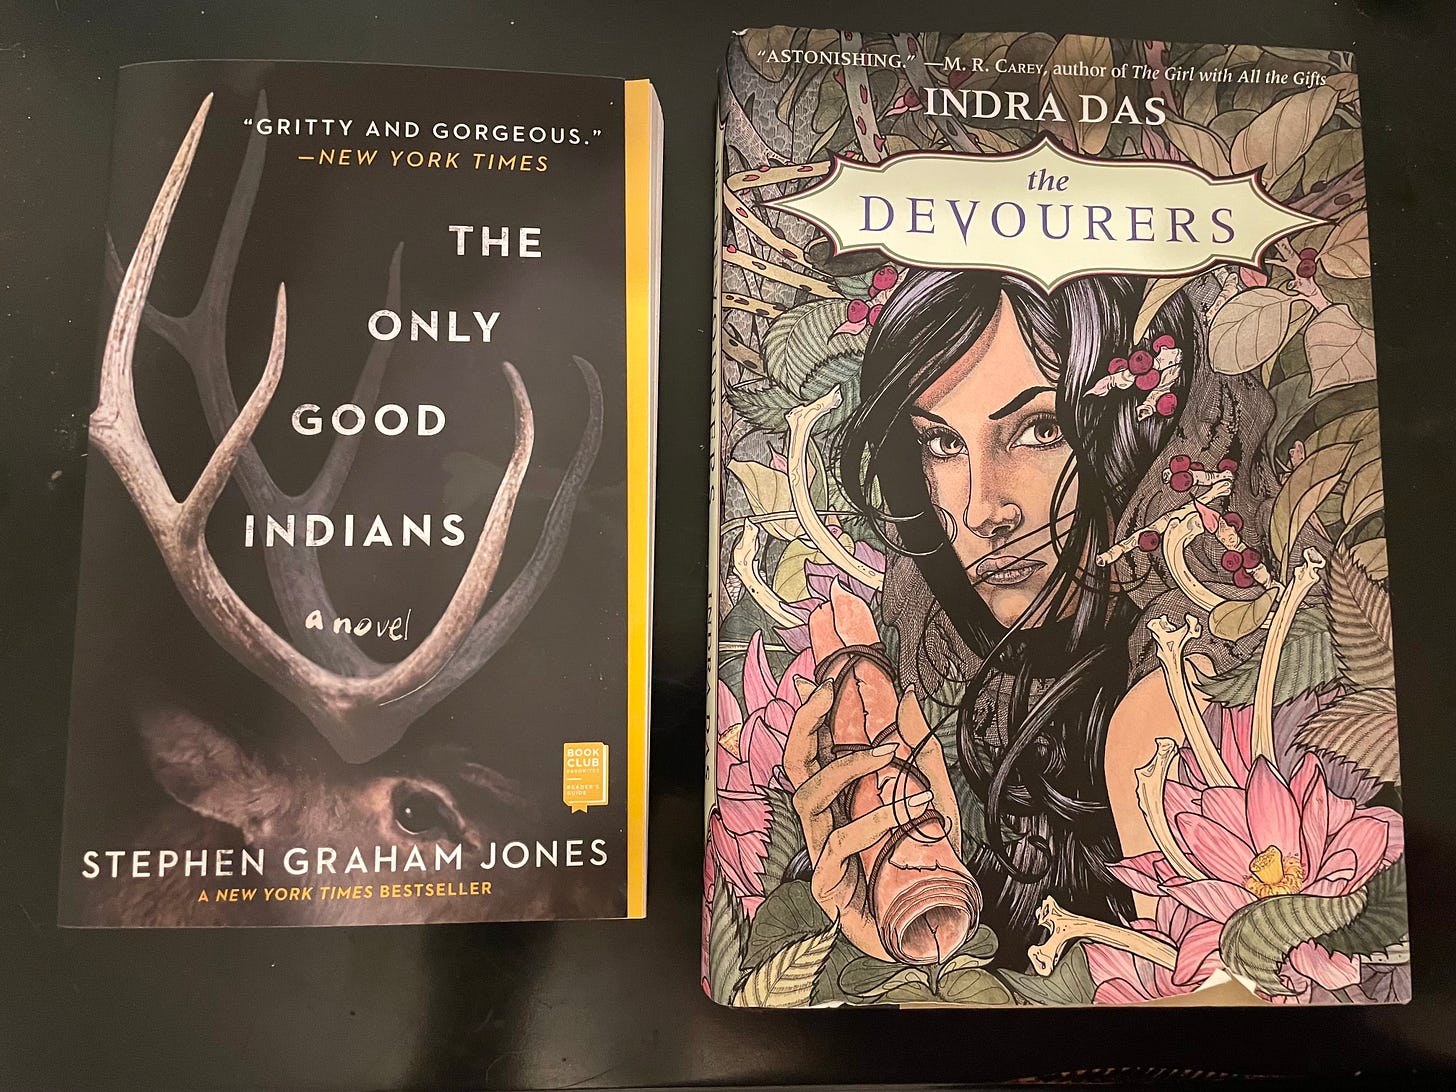 books: 'The Only Good Indians' by Stephen Graham Jones and 'The Devourers' by Indra Das